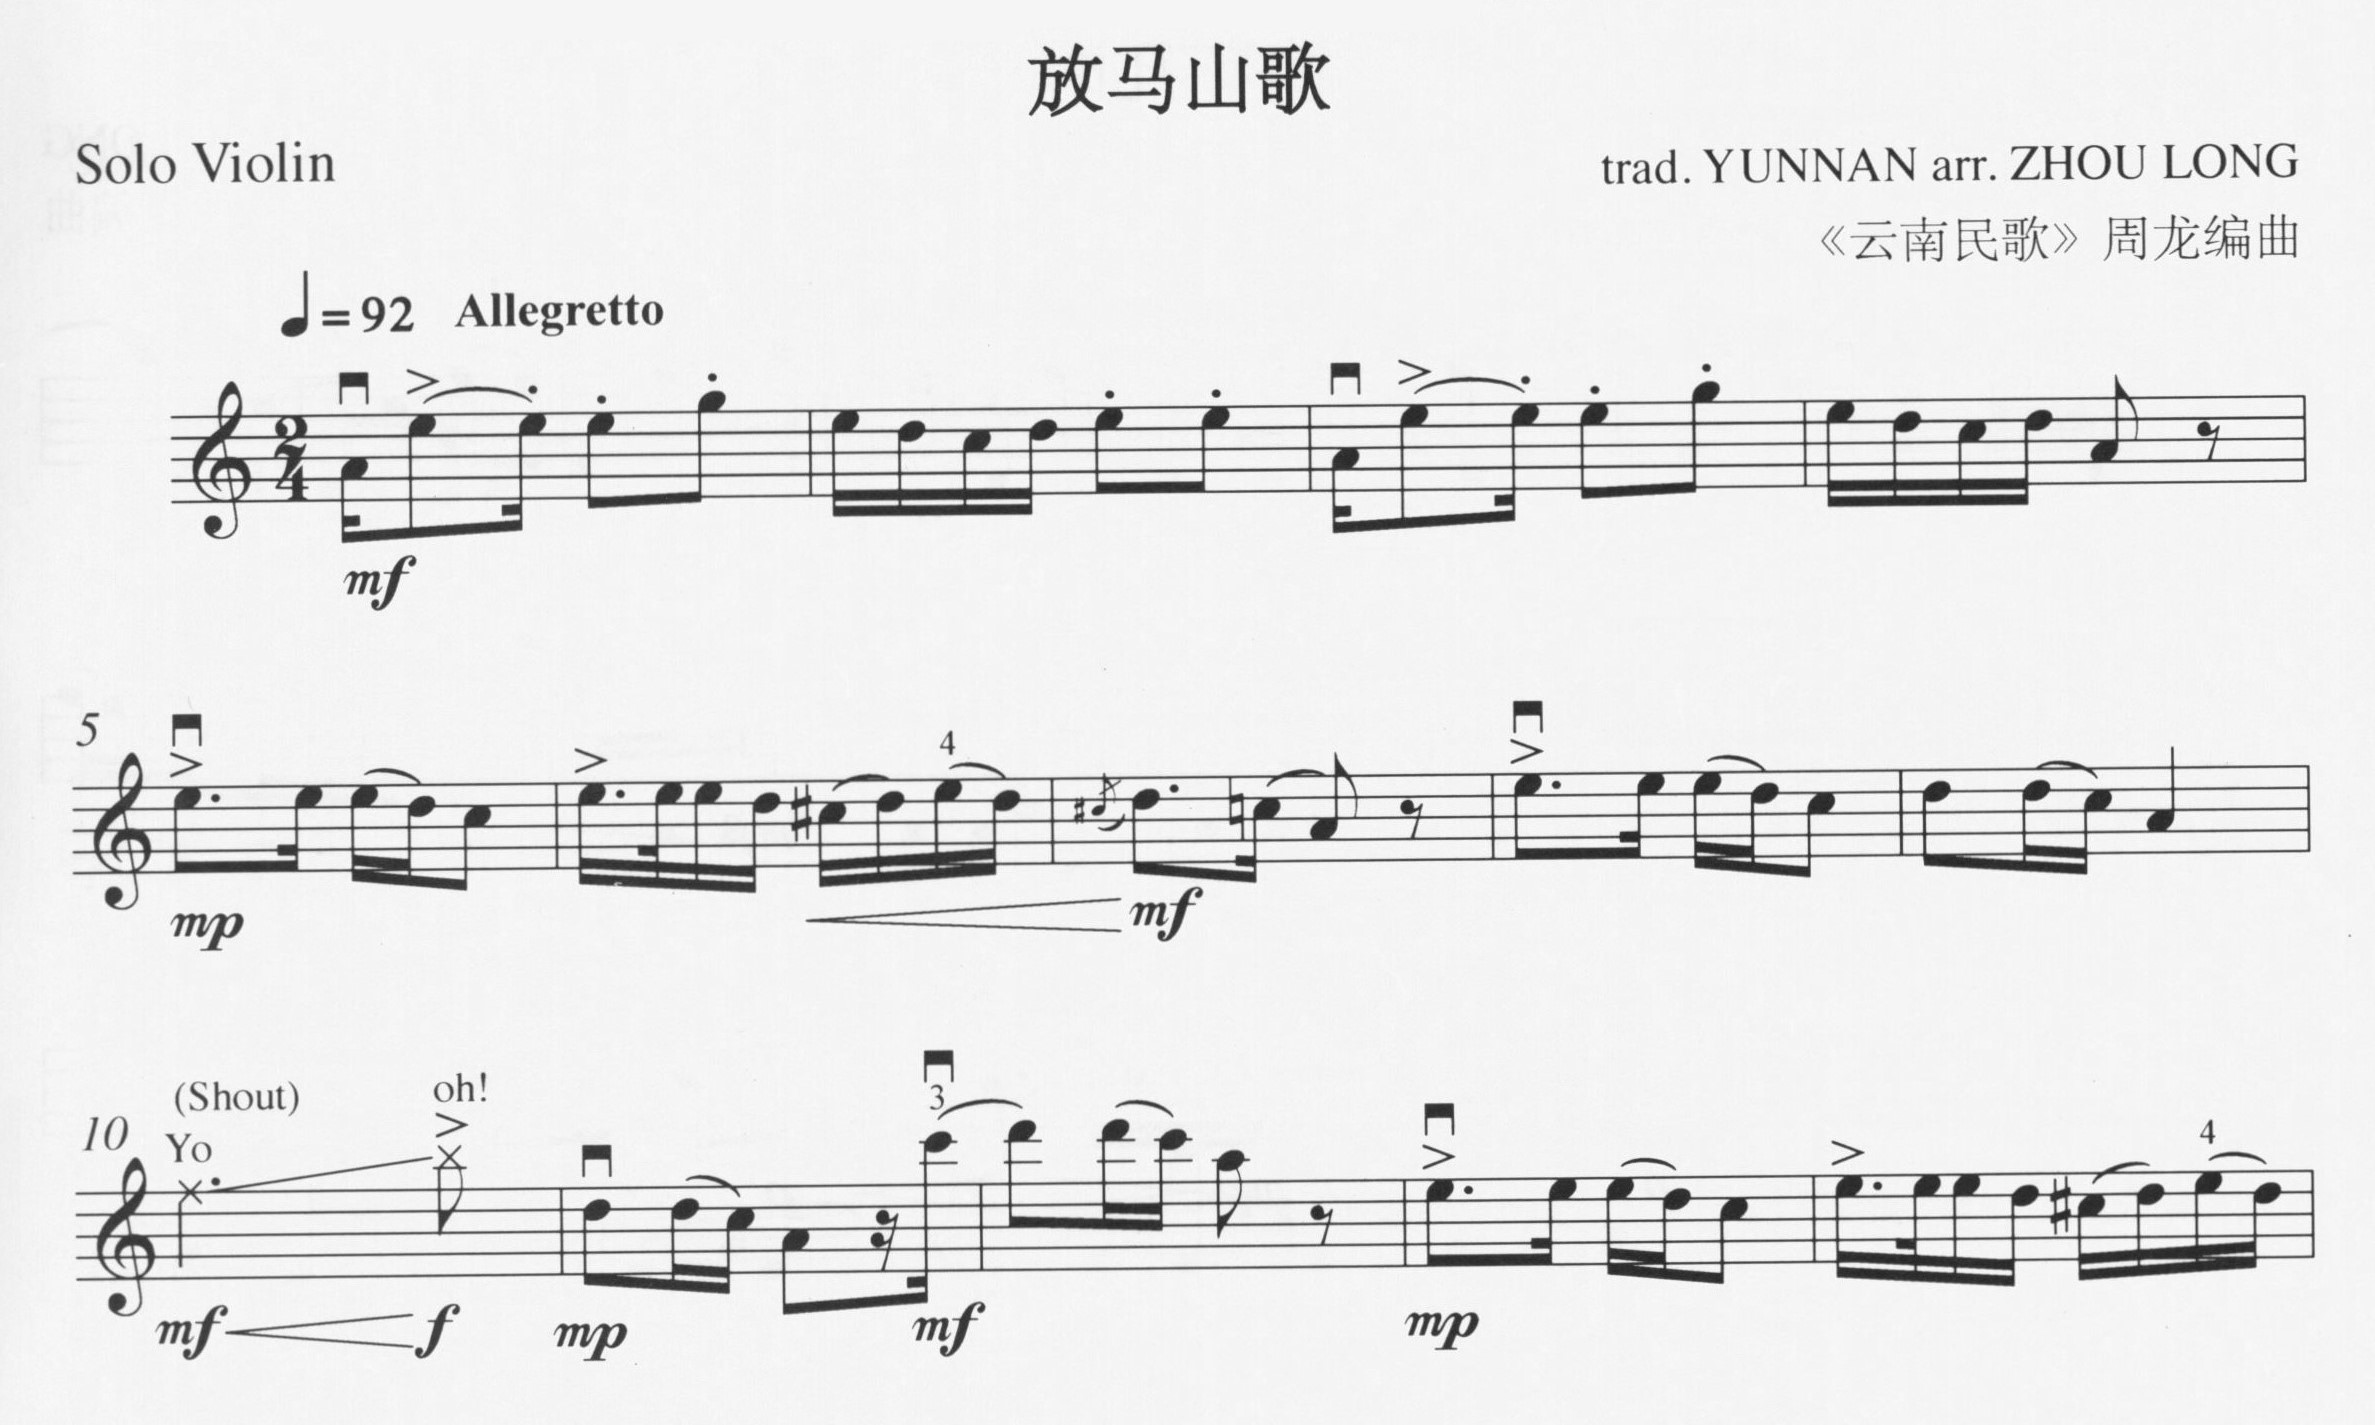 A Set of Chinese Folk Songs: for Solo Violin - Zhou Long